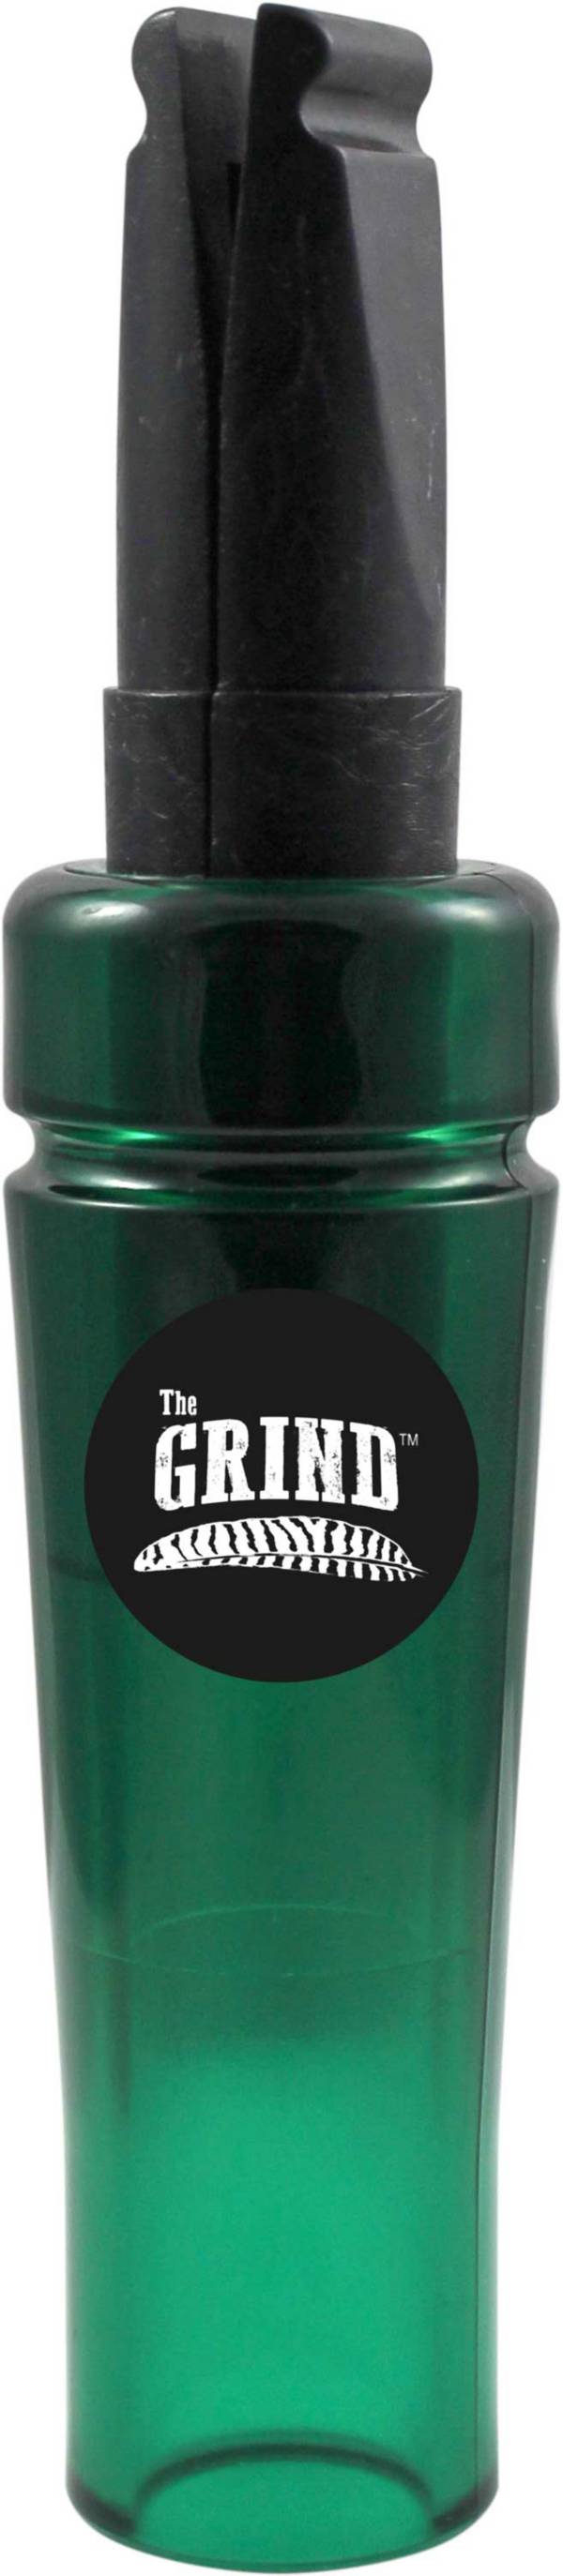 The Grind Outdoors Crow “Caw” II Crow Call